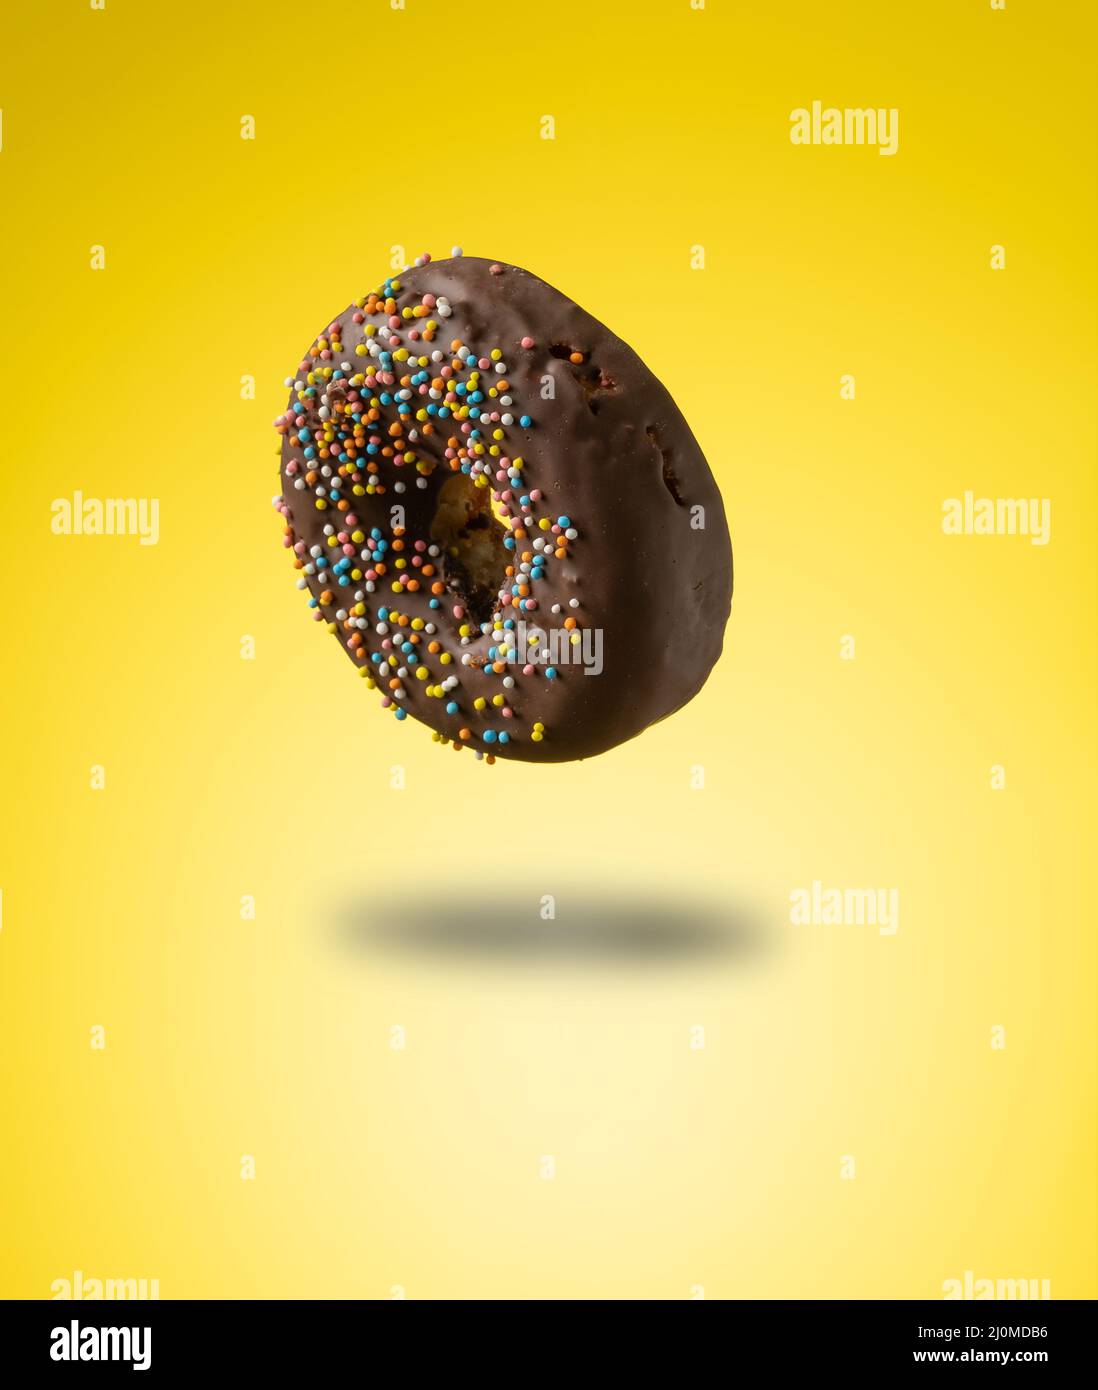 Chocolate donuts with multicolored sprinkles levitate on a yellow background Stock Photo